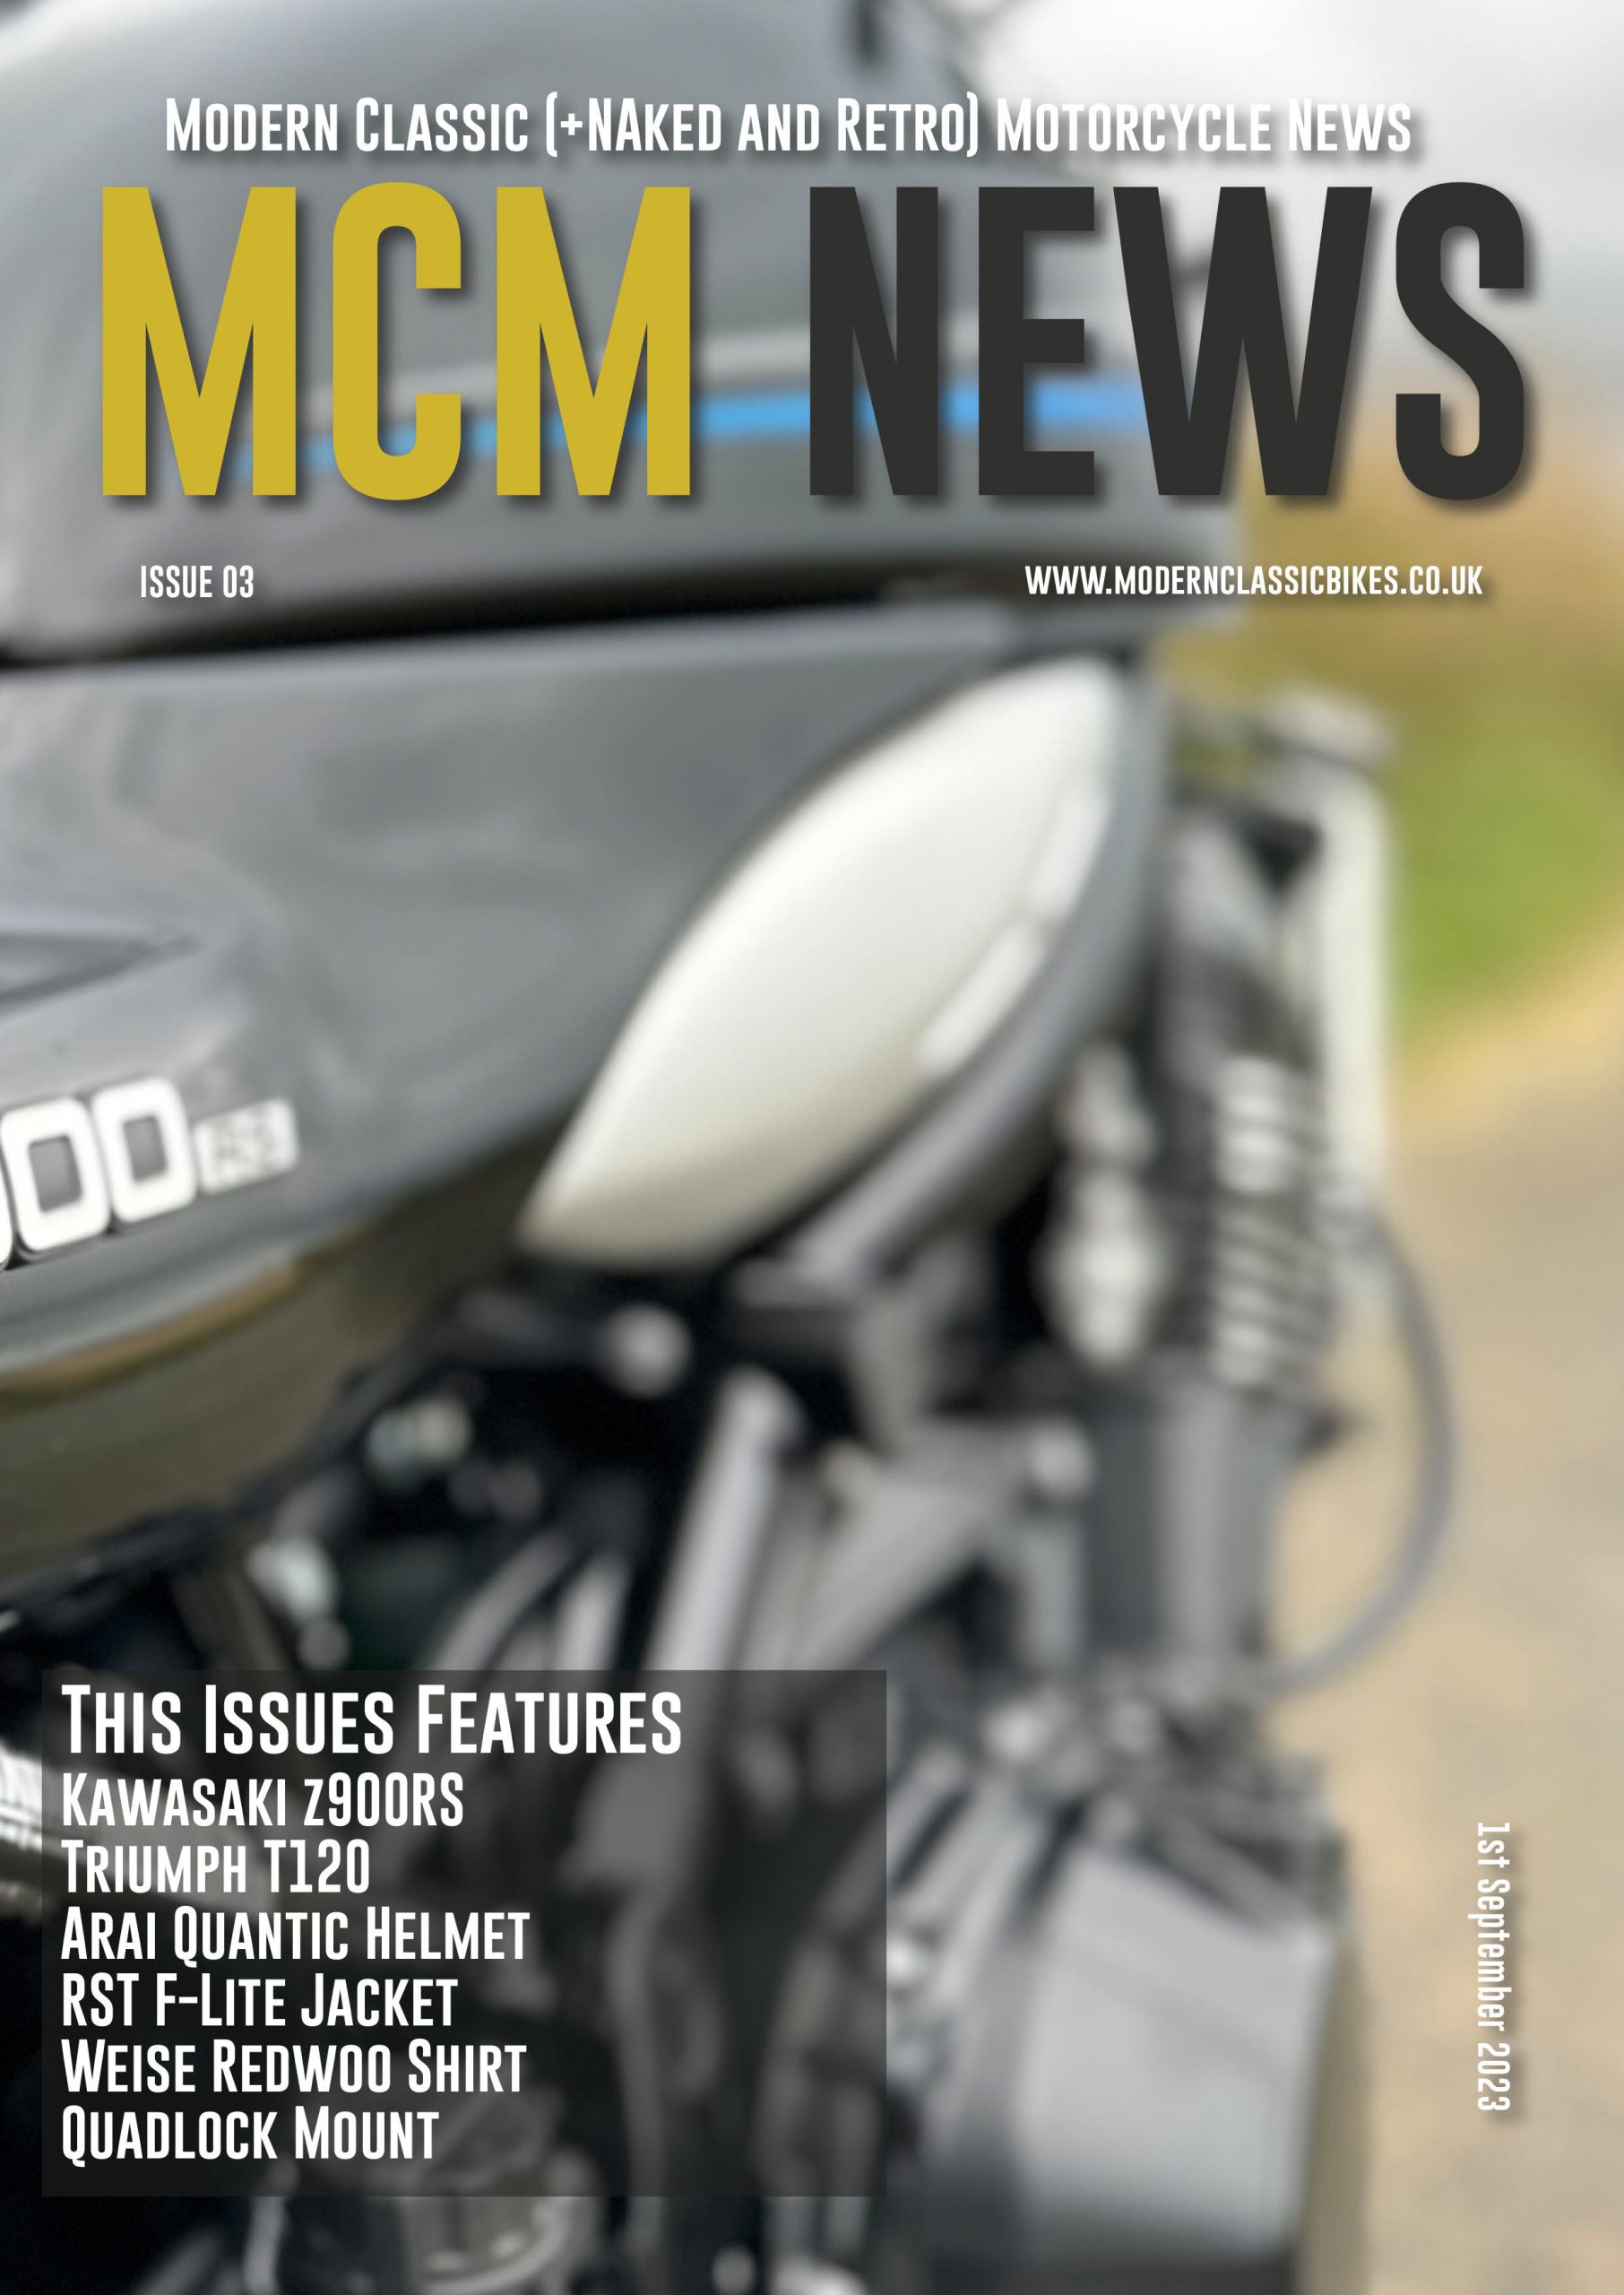 Modern Classic Motorcycle News Magazine – Issue 3